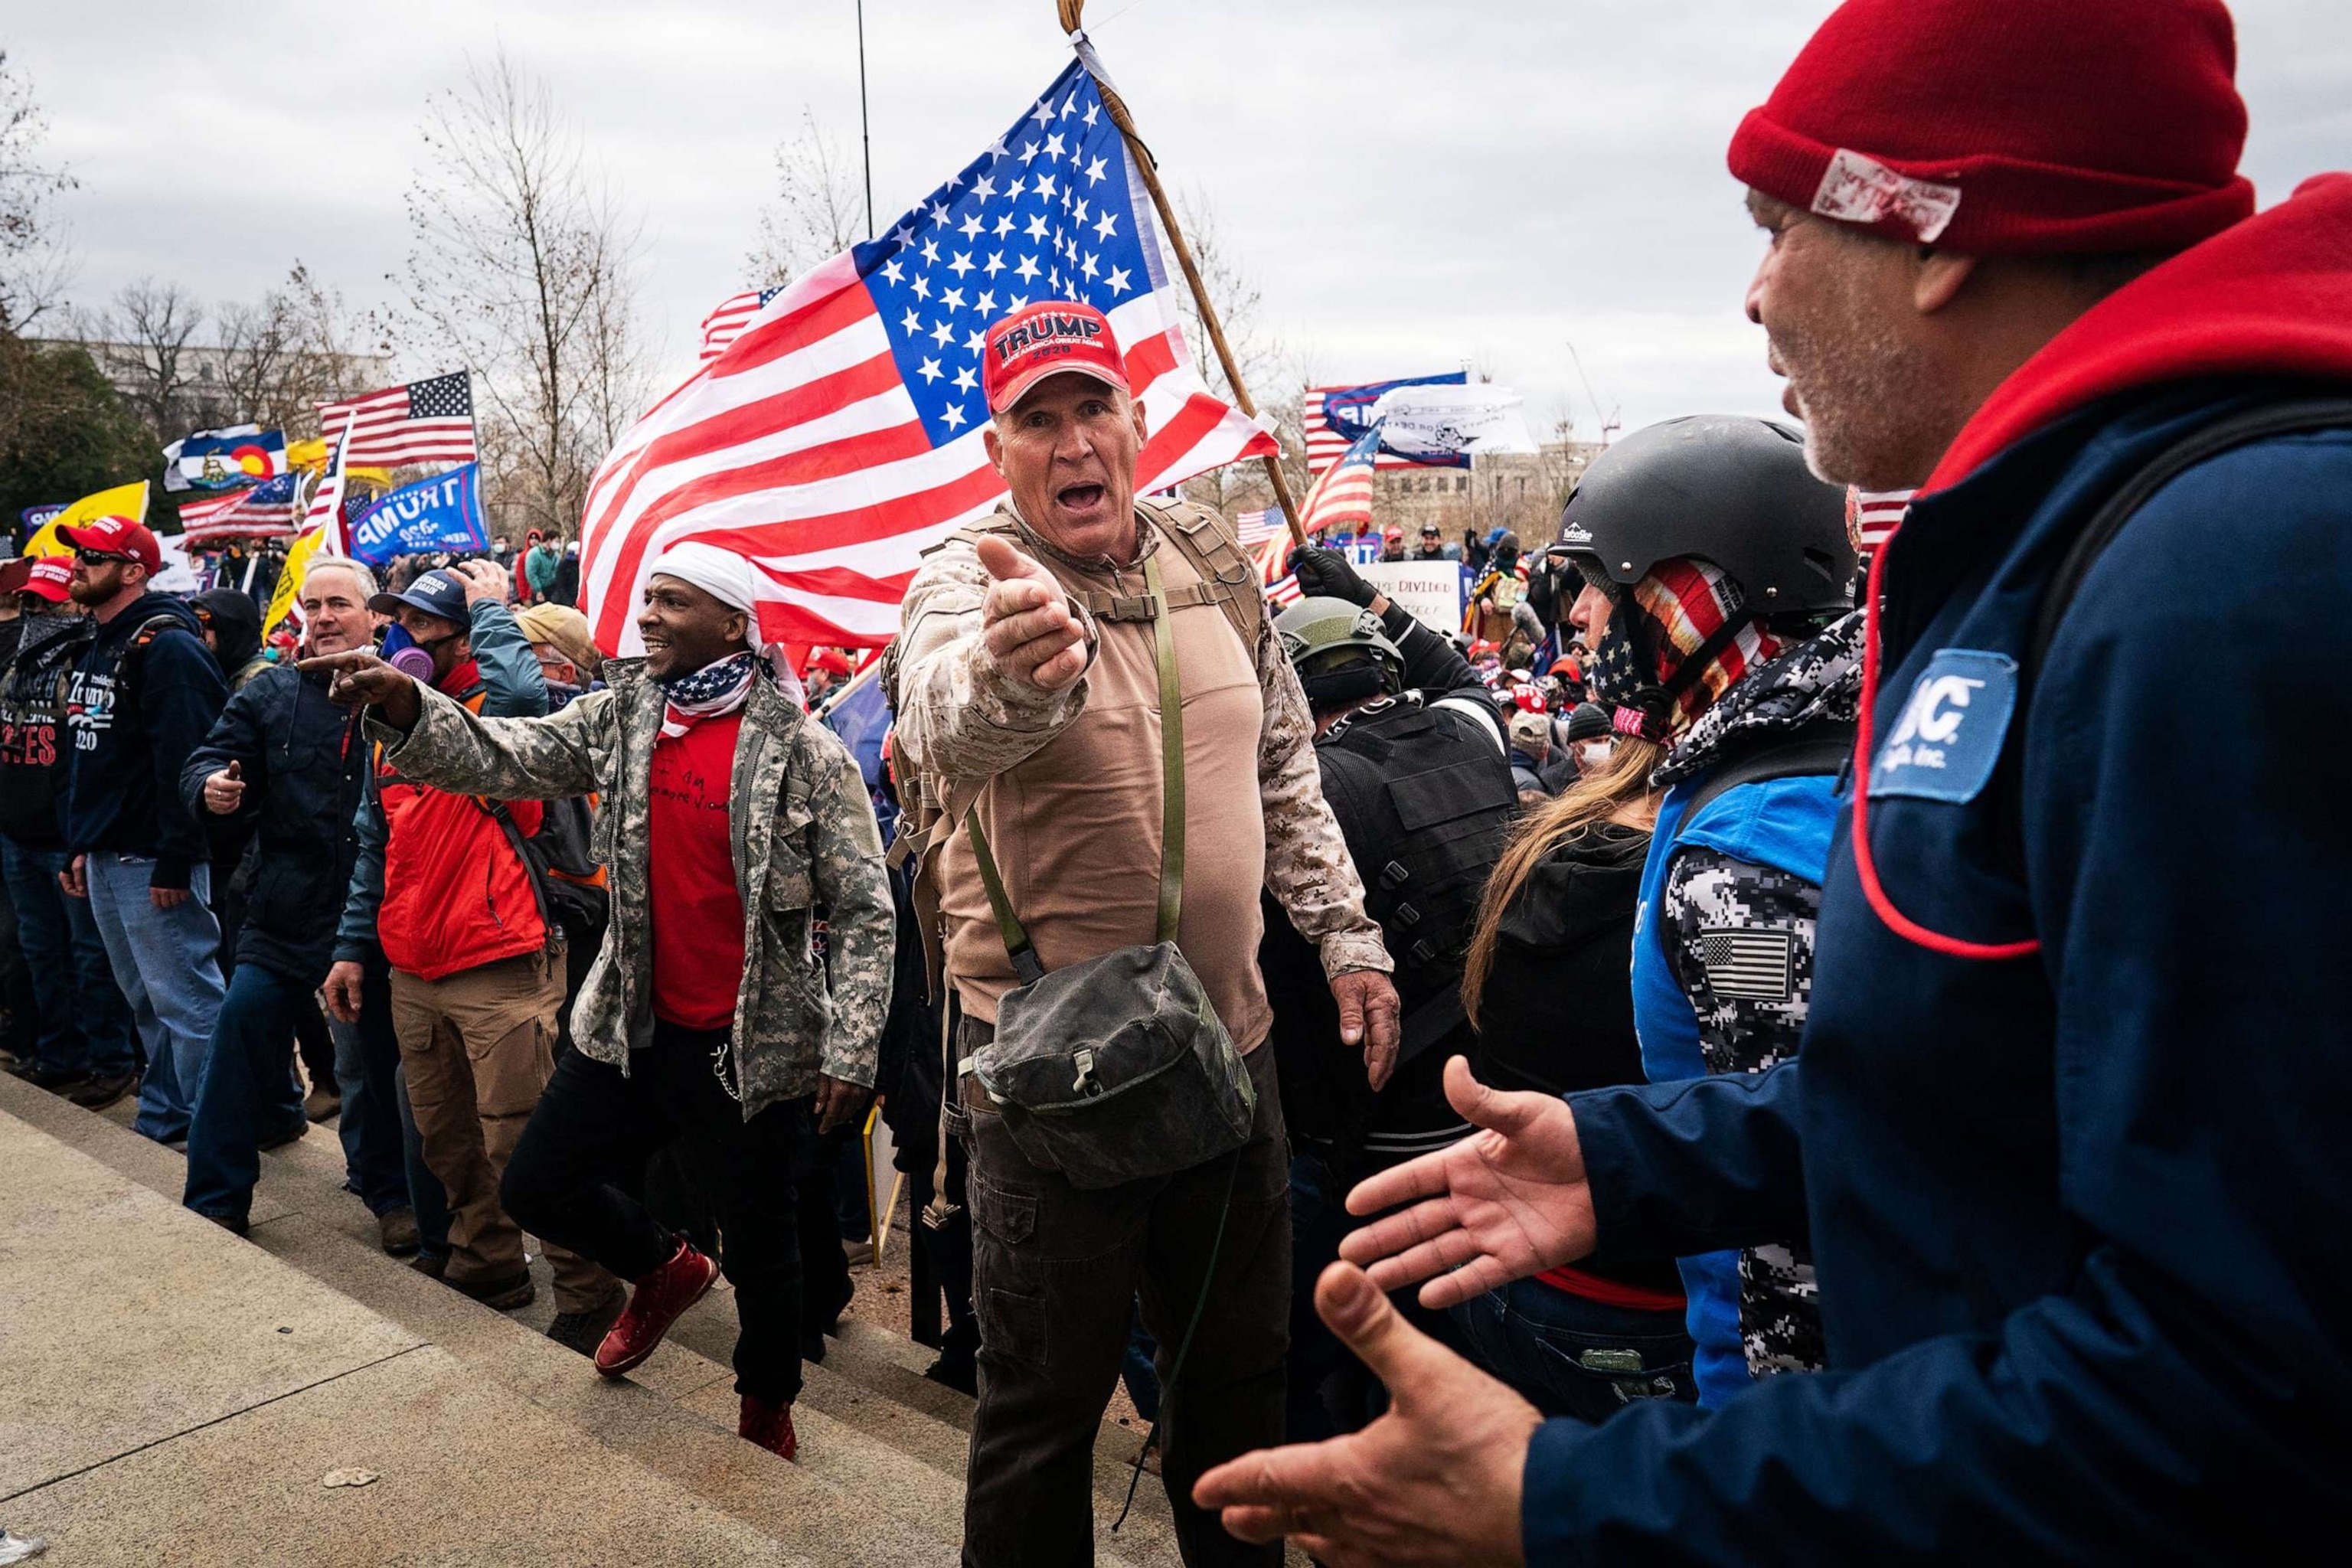 PHOTO: Ray Epps, in the red Trump hat, center, gestures to others as people gather on the West Front of the U.S. Capitol on Jan. 6, 2021, in Washington, D.C.